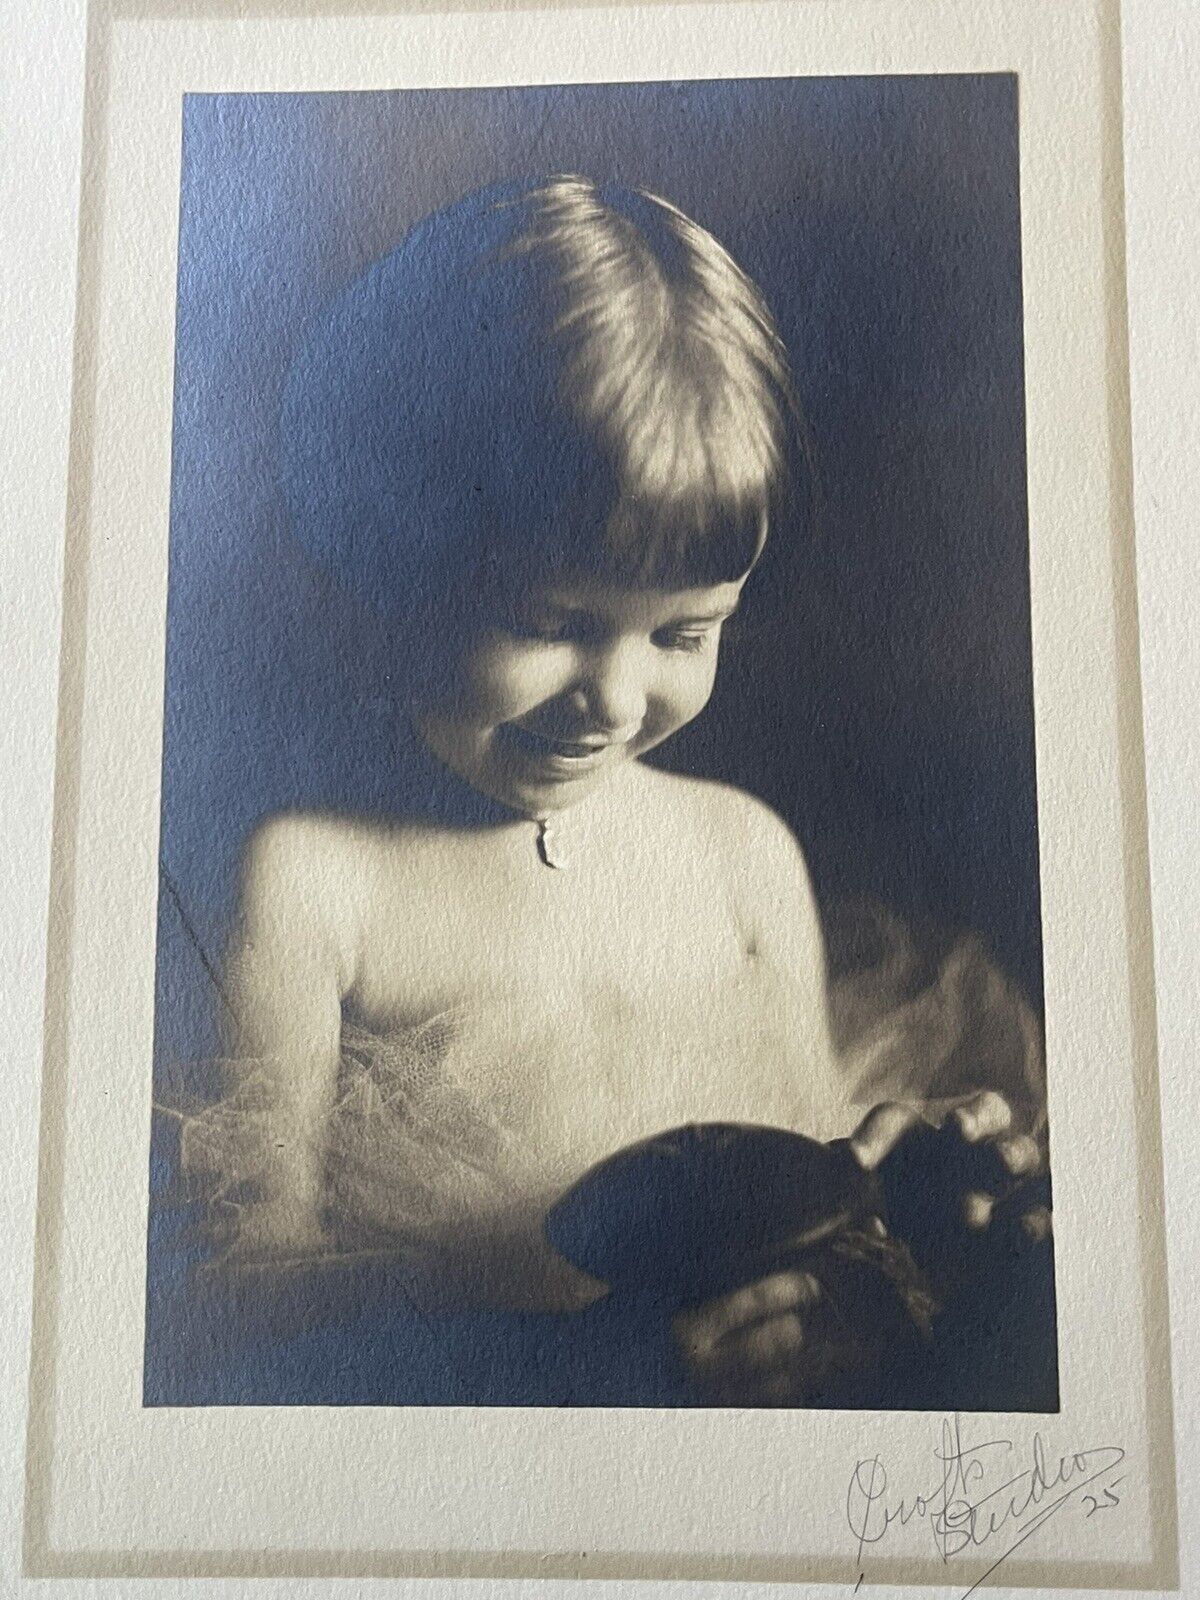 Luminous 1925 Large Studio Portrait Of A Child With Toy And A Delighted Face